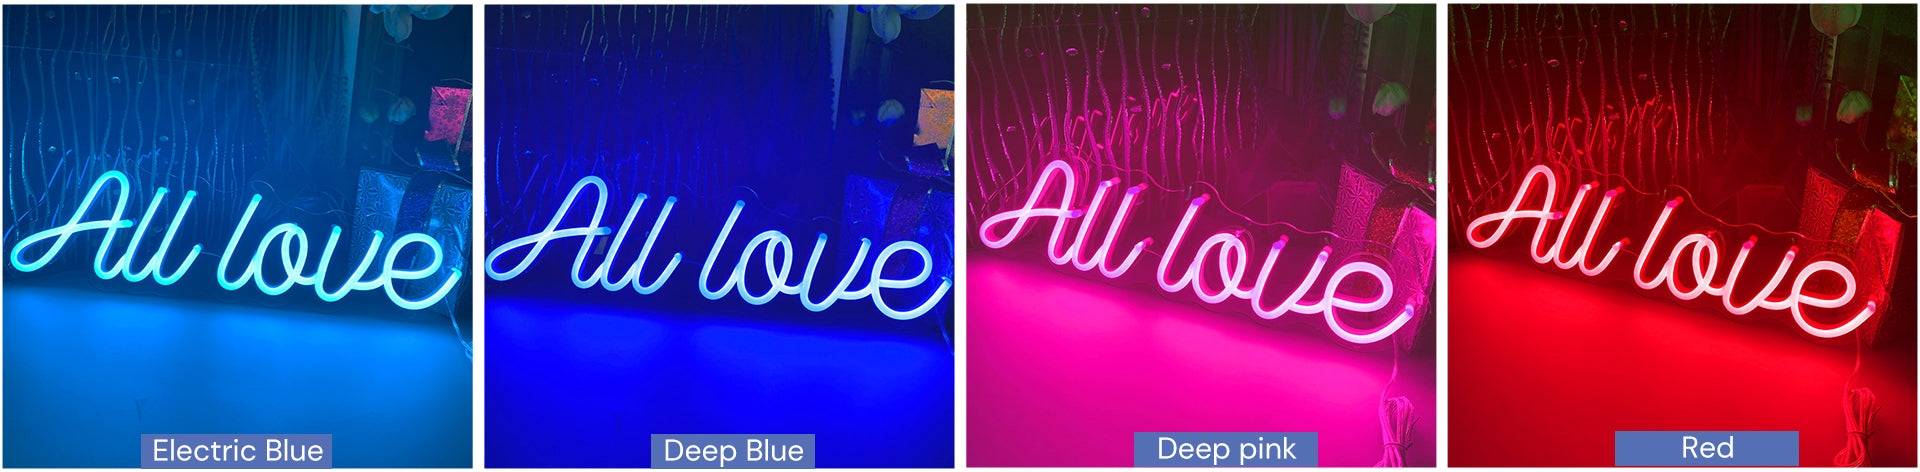 all love neon sign